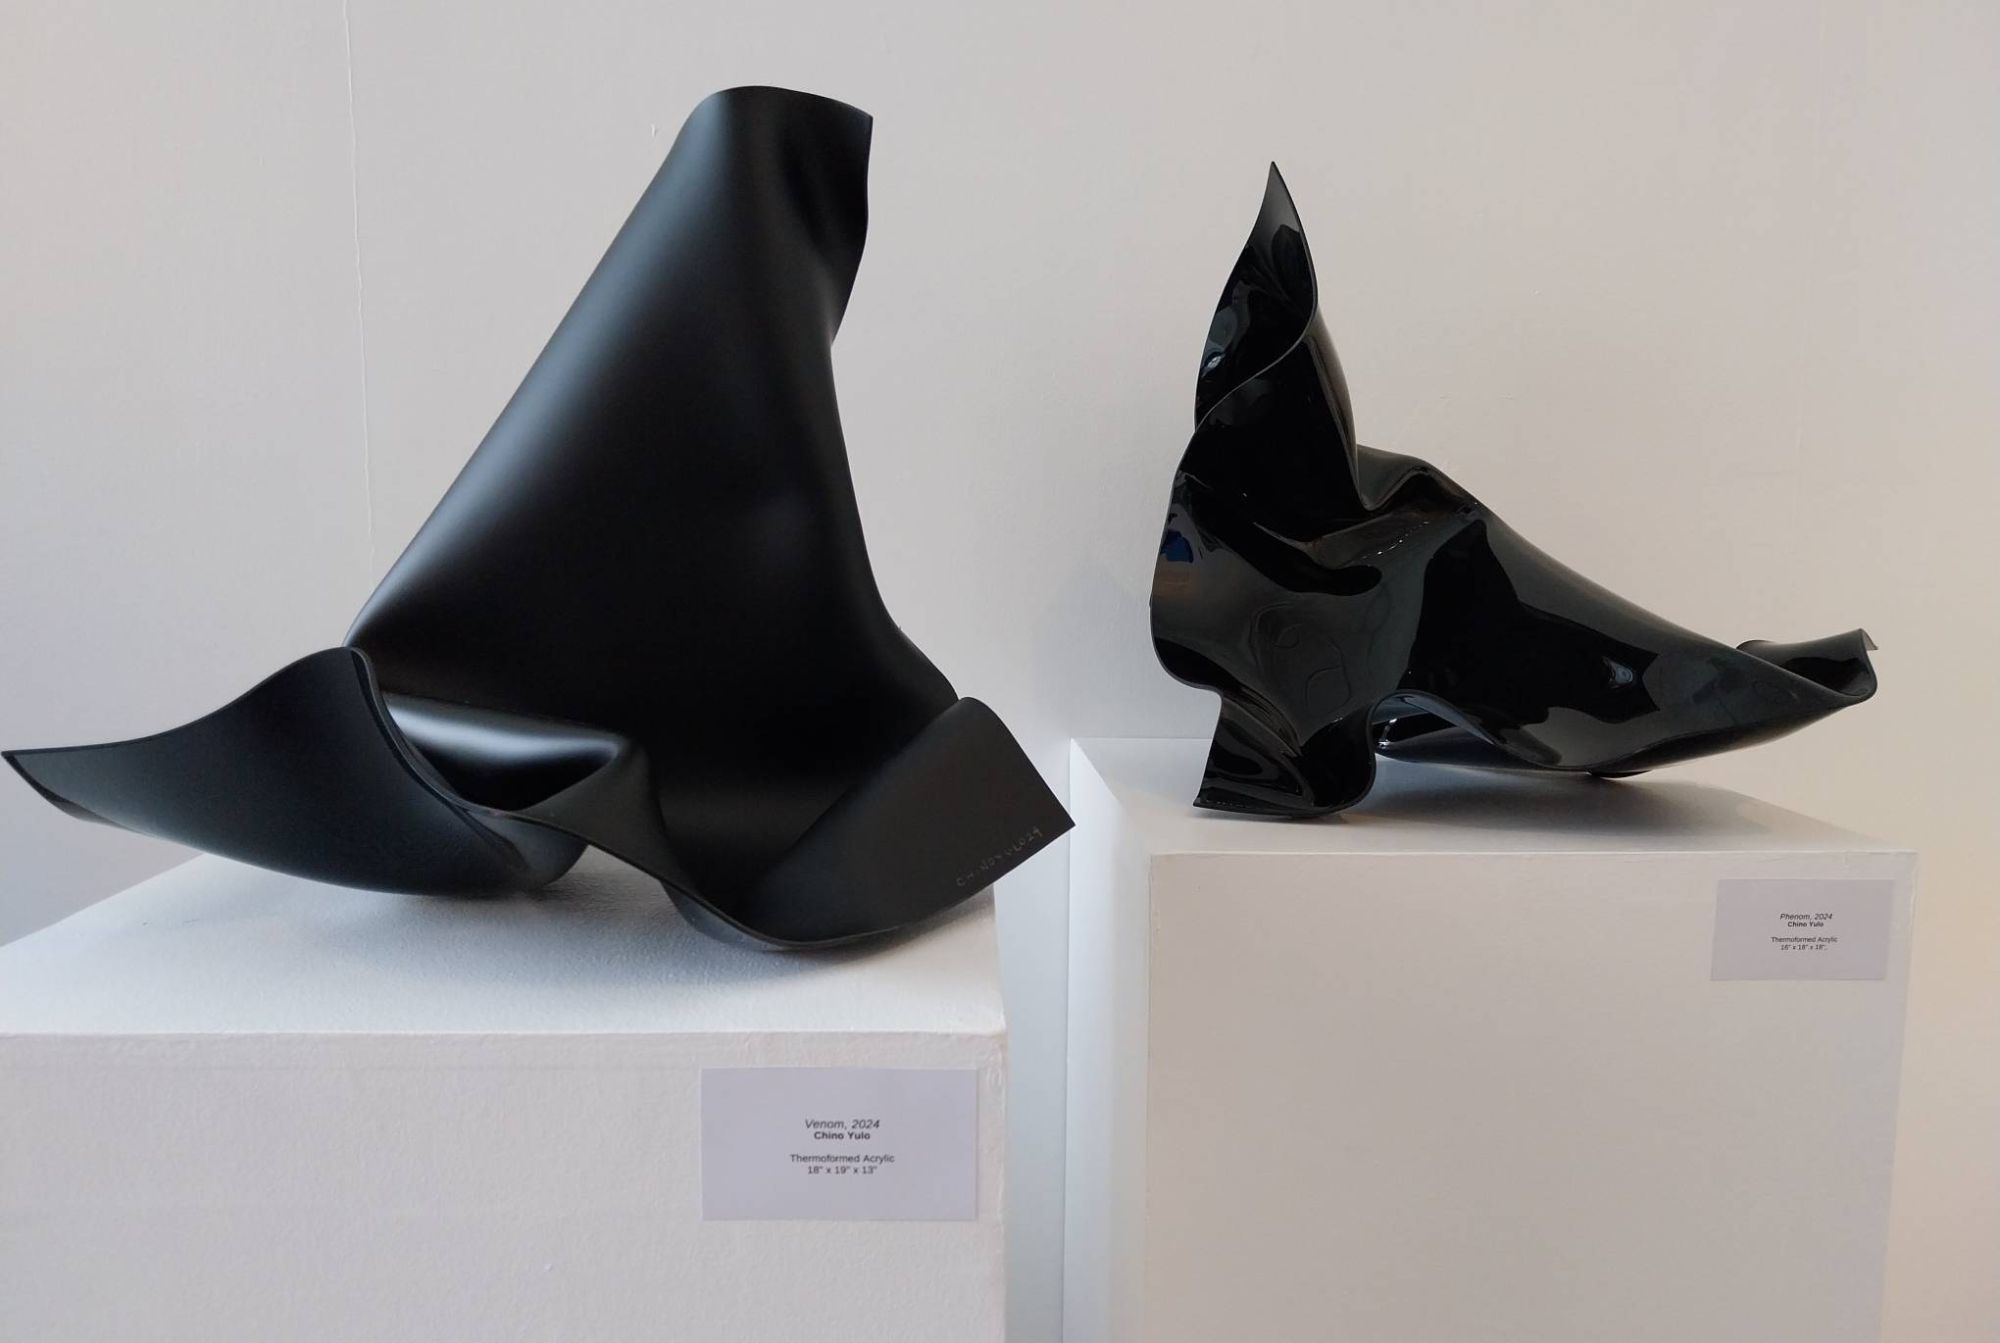 Two black sculptures by Chino Yulo in "Be Water." Photo by Elle Yap.